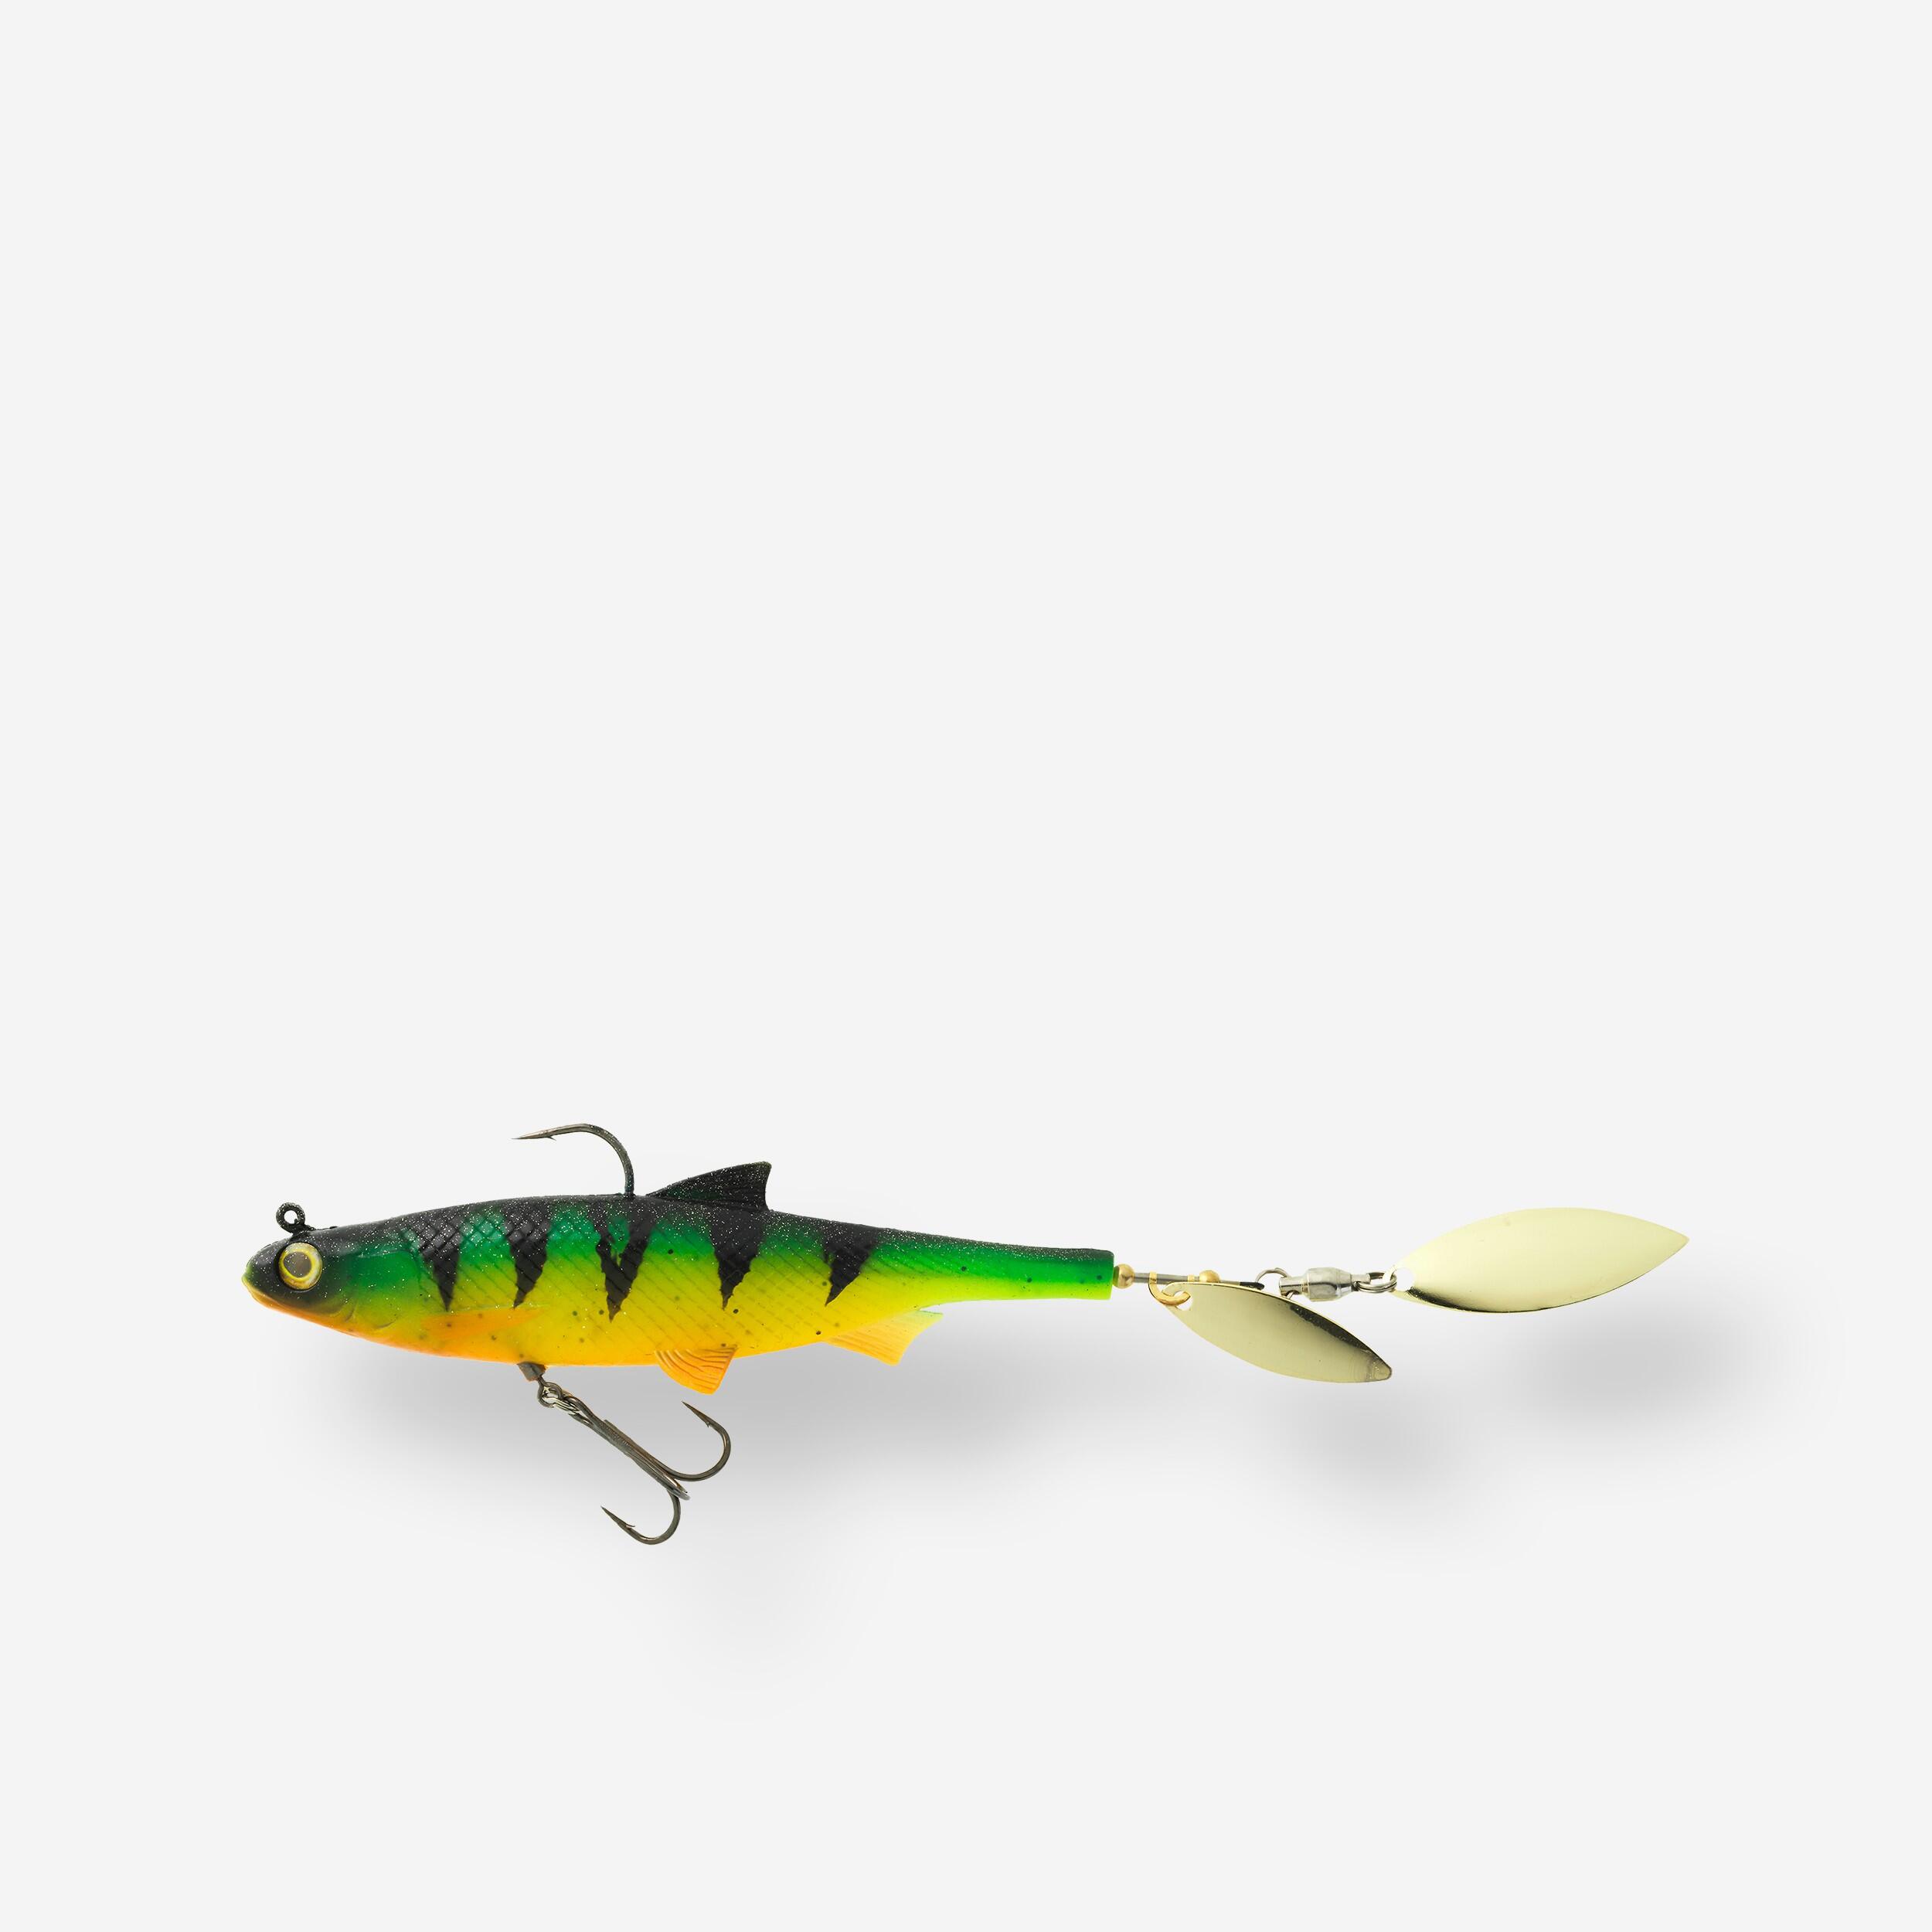 LURE FISHING ROACHSPIN 120 FIRETIGER BLADED SHAD SOFT LURE 1/2